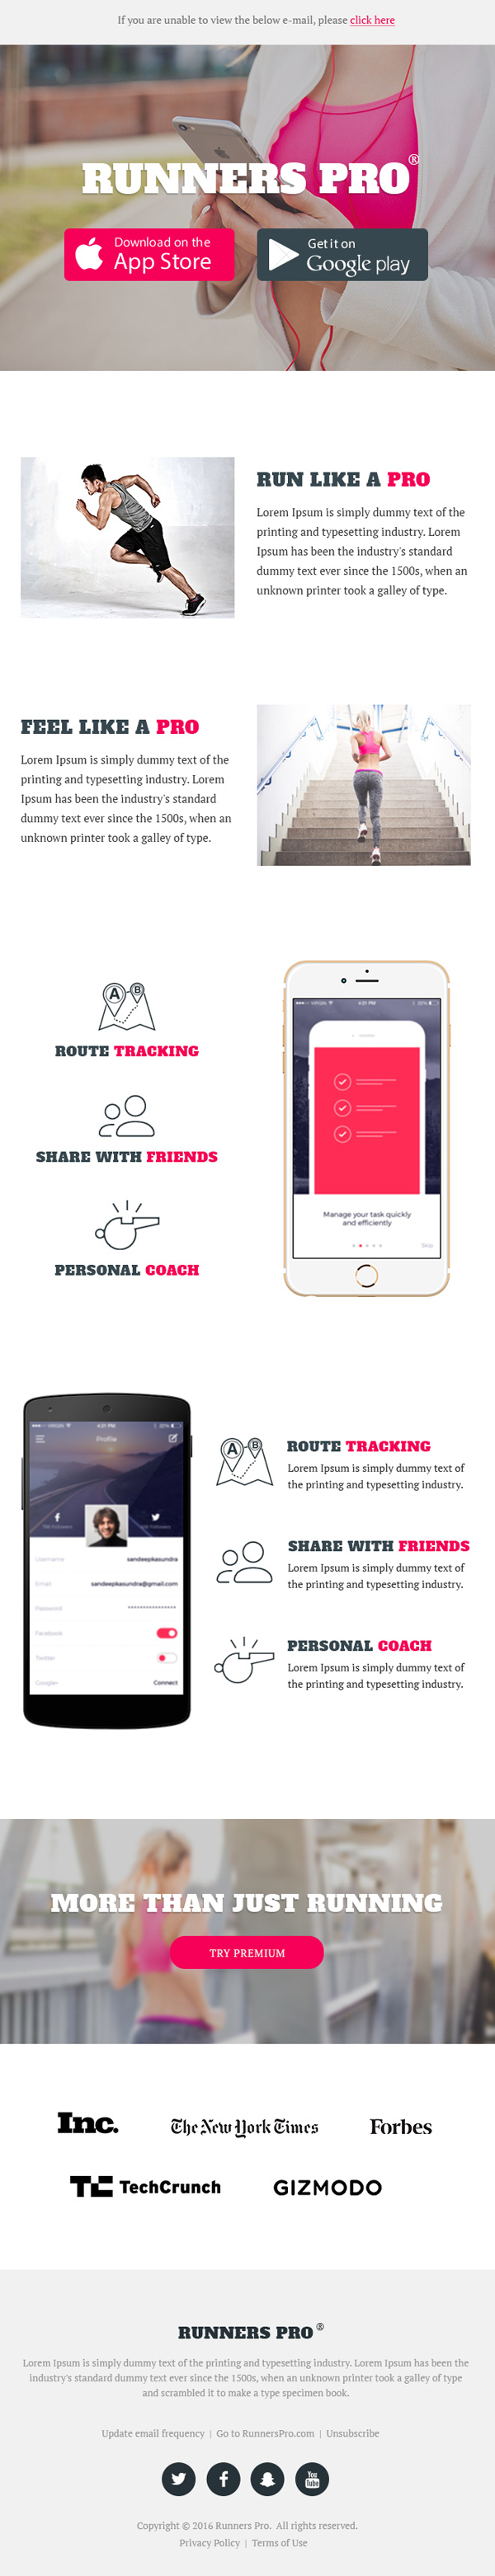 Runners Pro – Free App Download Email Template PSD